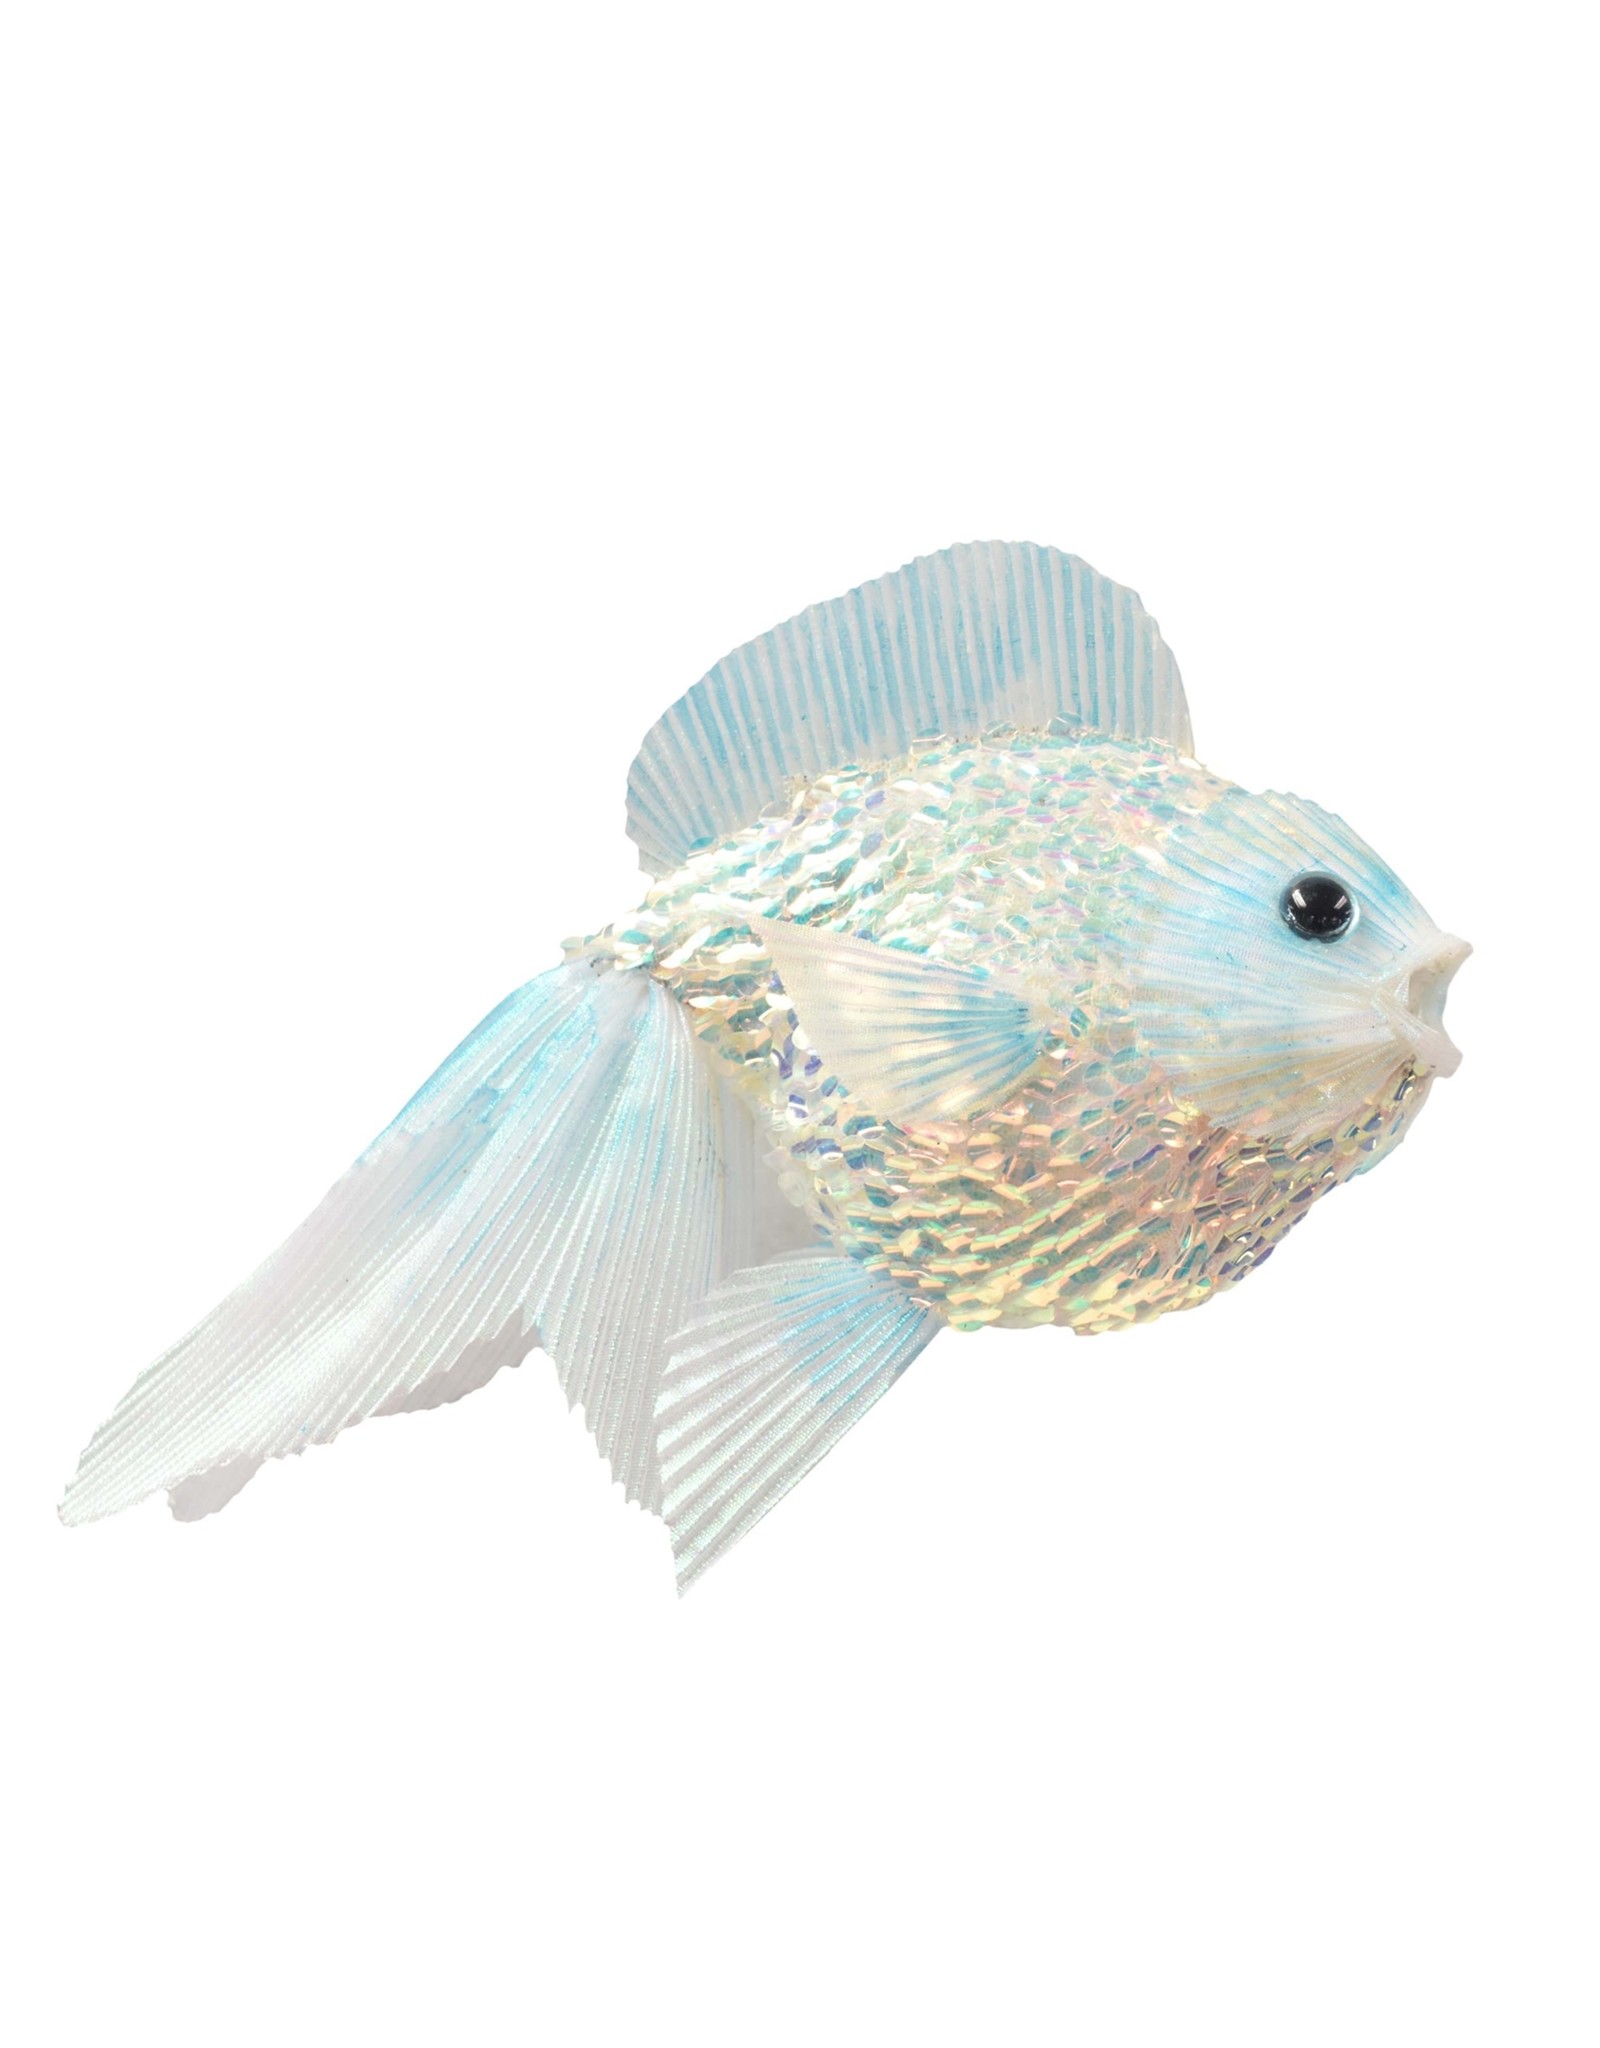 David Christophers Glittered Sequined Gold Fish Blue Opal 8x6 Inch